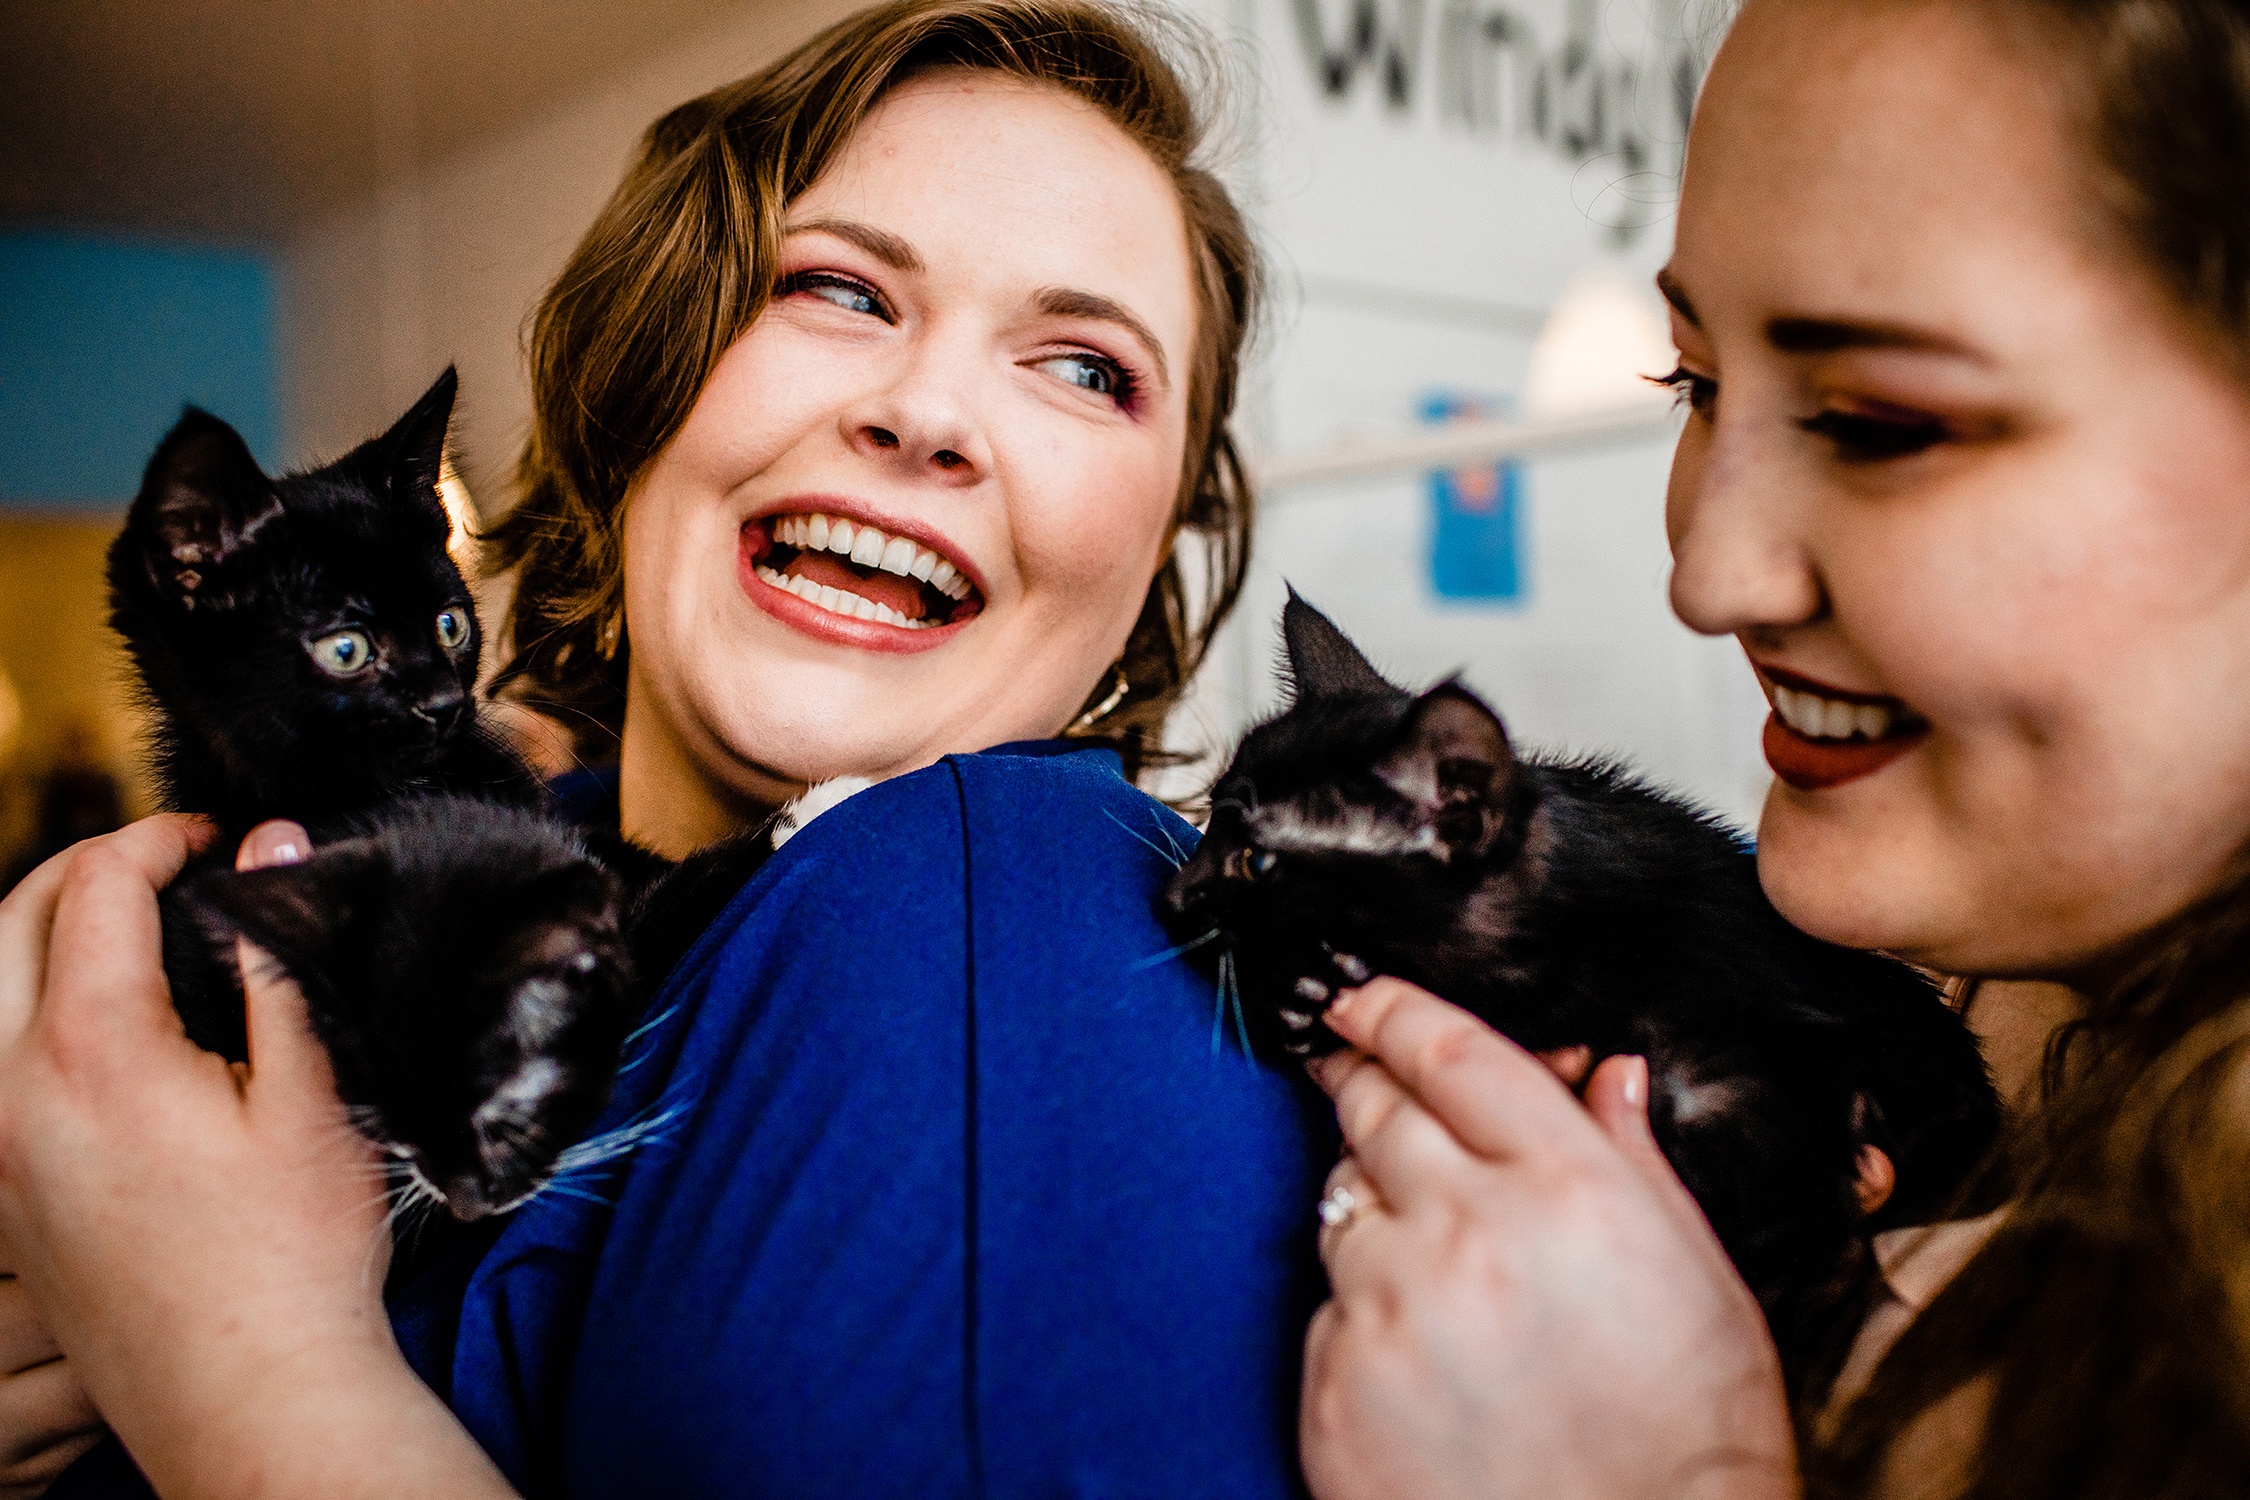 A couple laughs together while holding kittens during a cat cafe engagement session in Chicago.